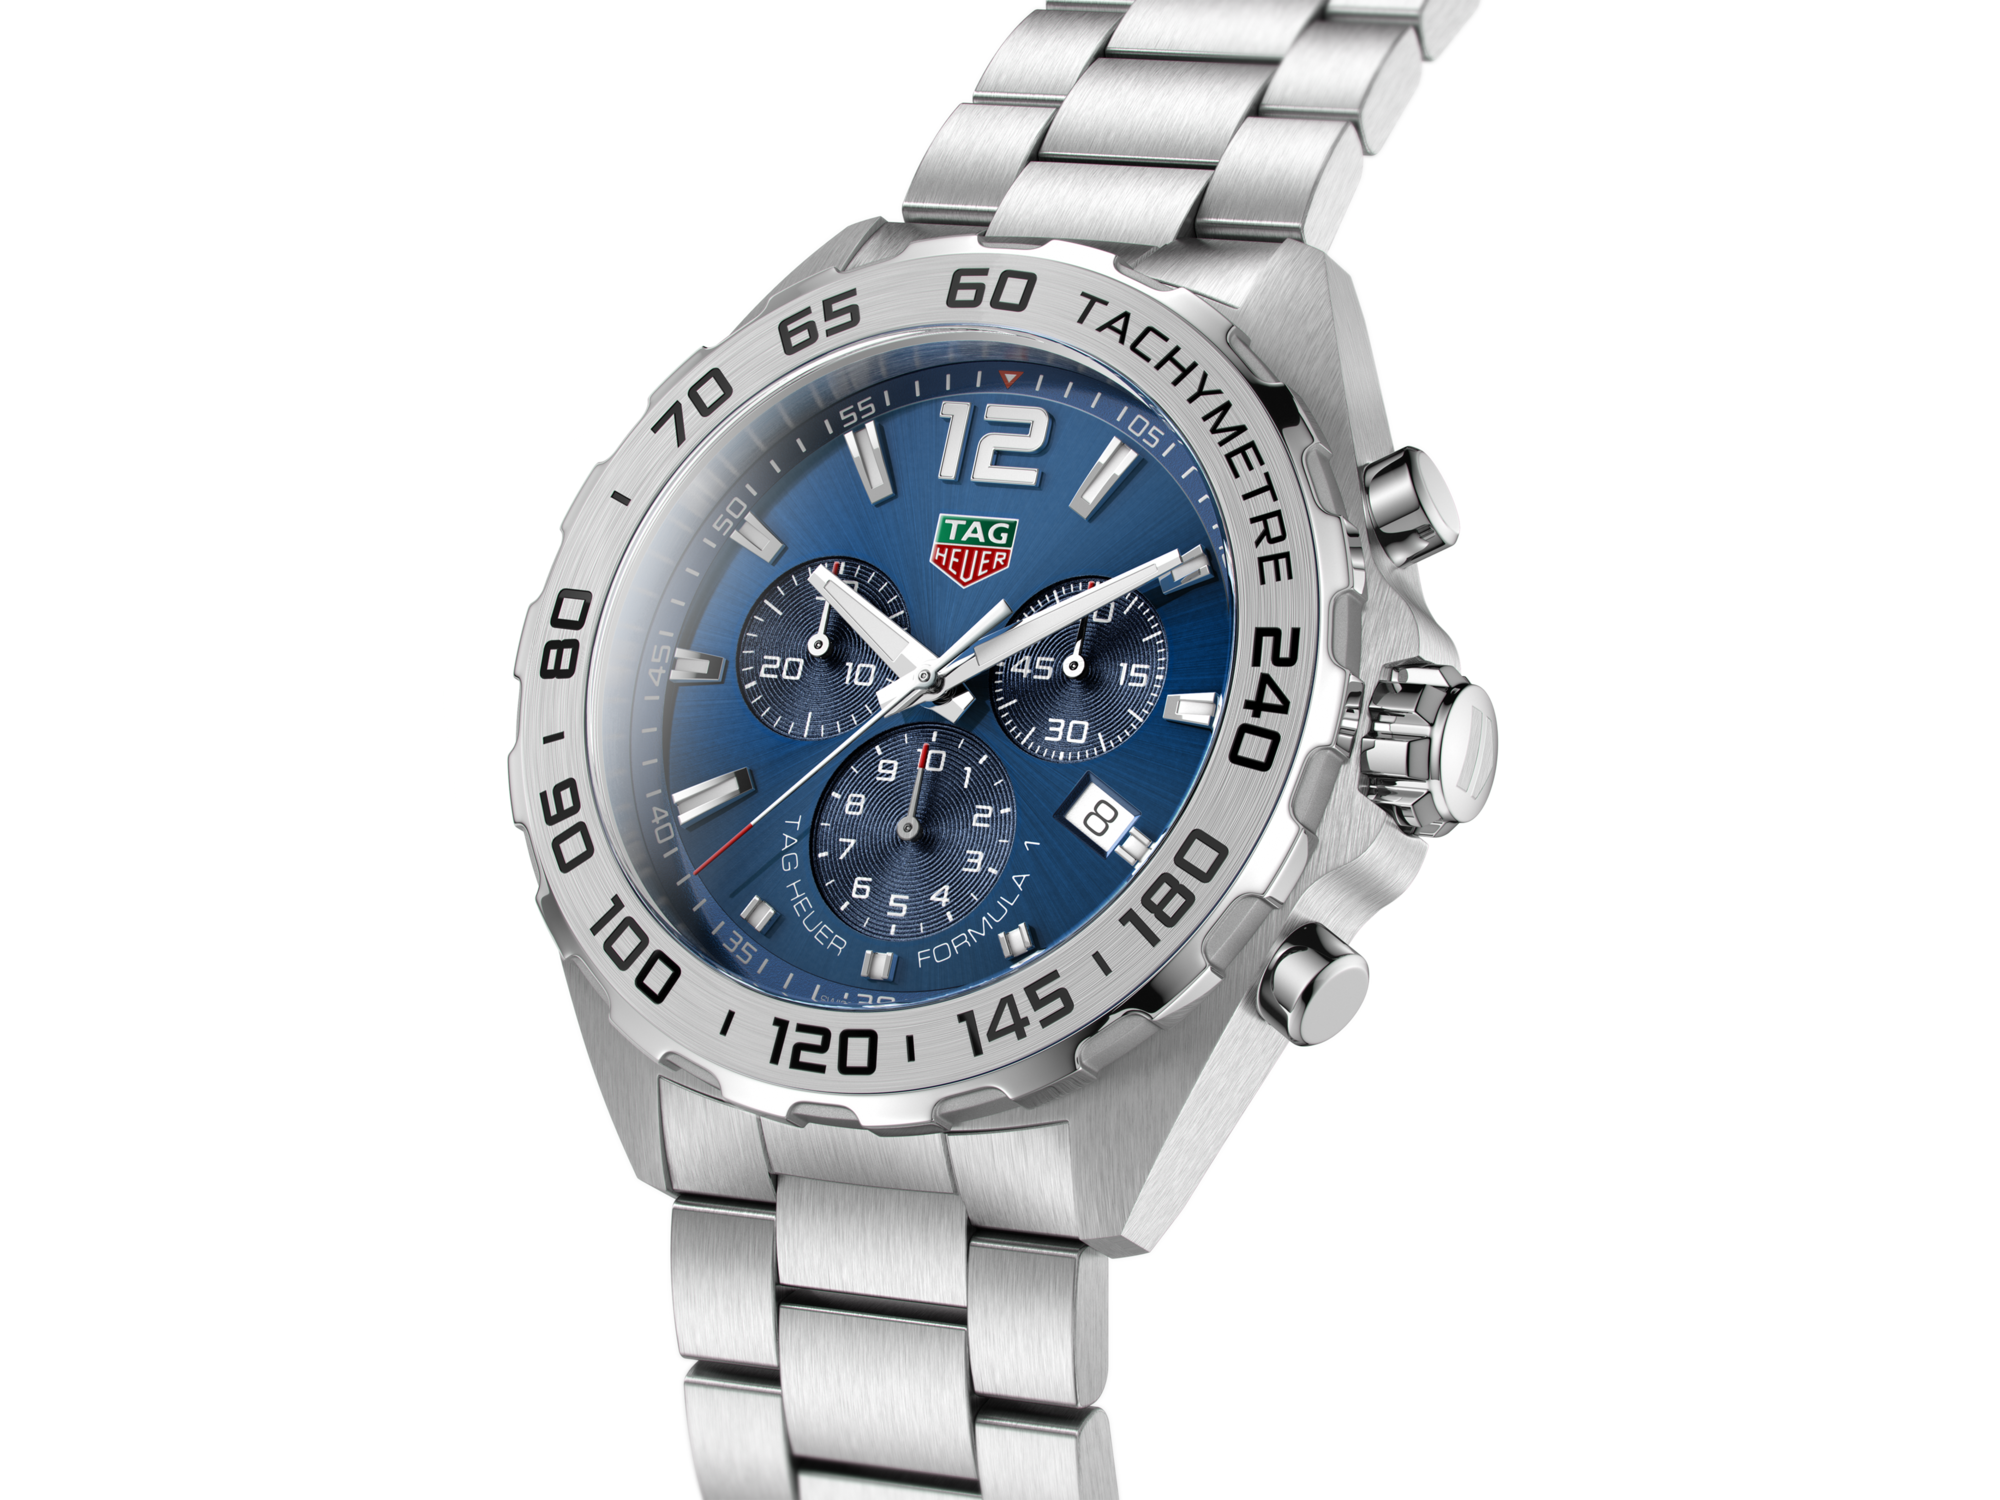 Tag Heuer Men's CAZ101V.BA0842 Formula 1 Chronograph Stainless Steel Watch